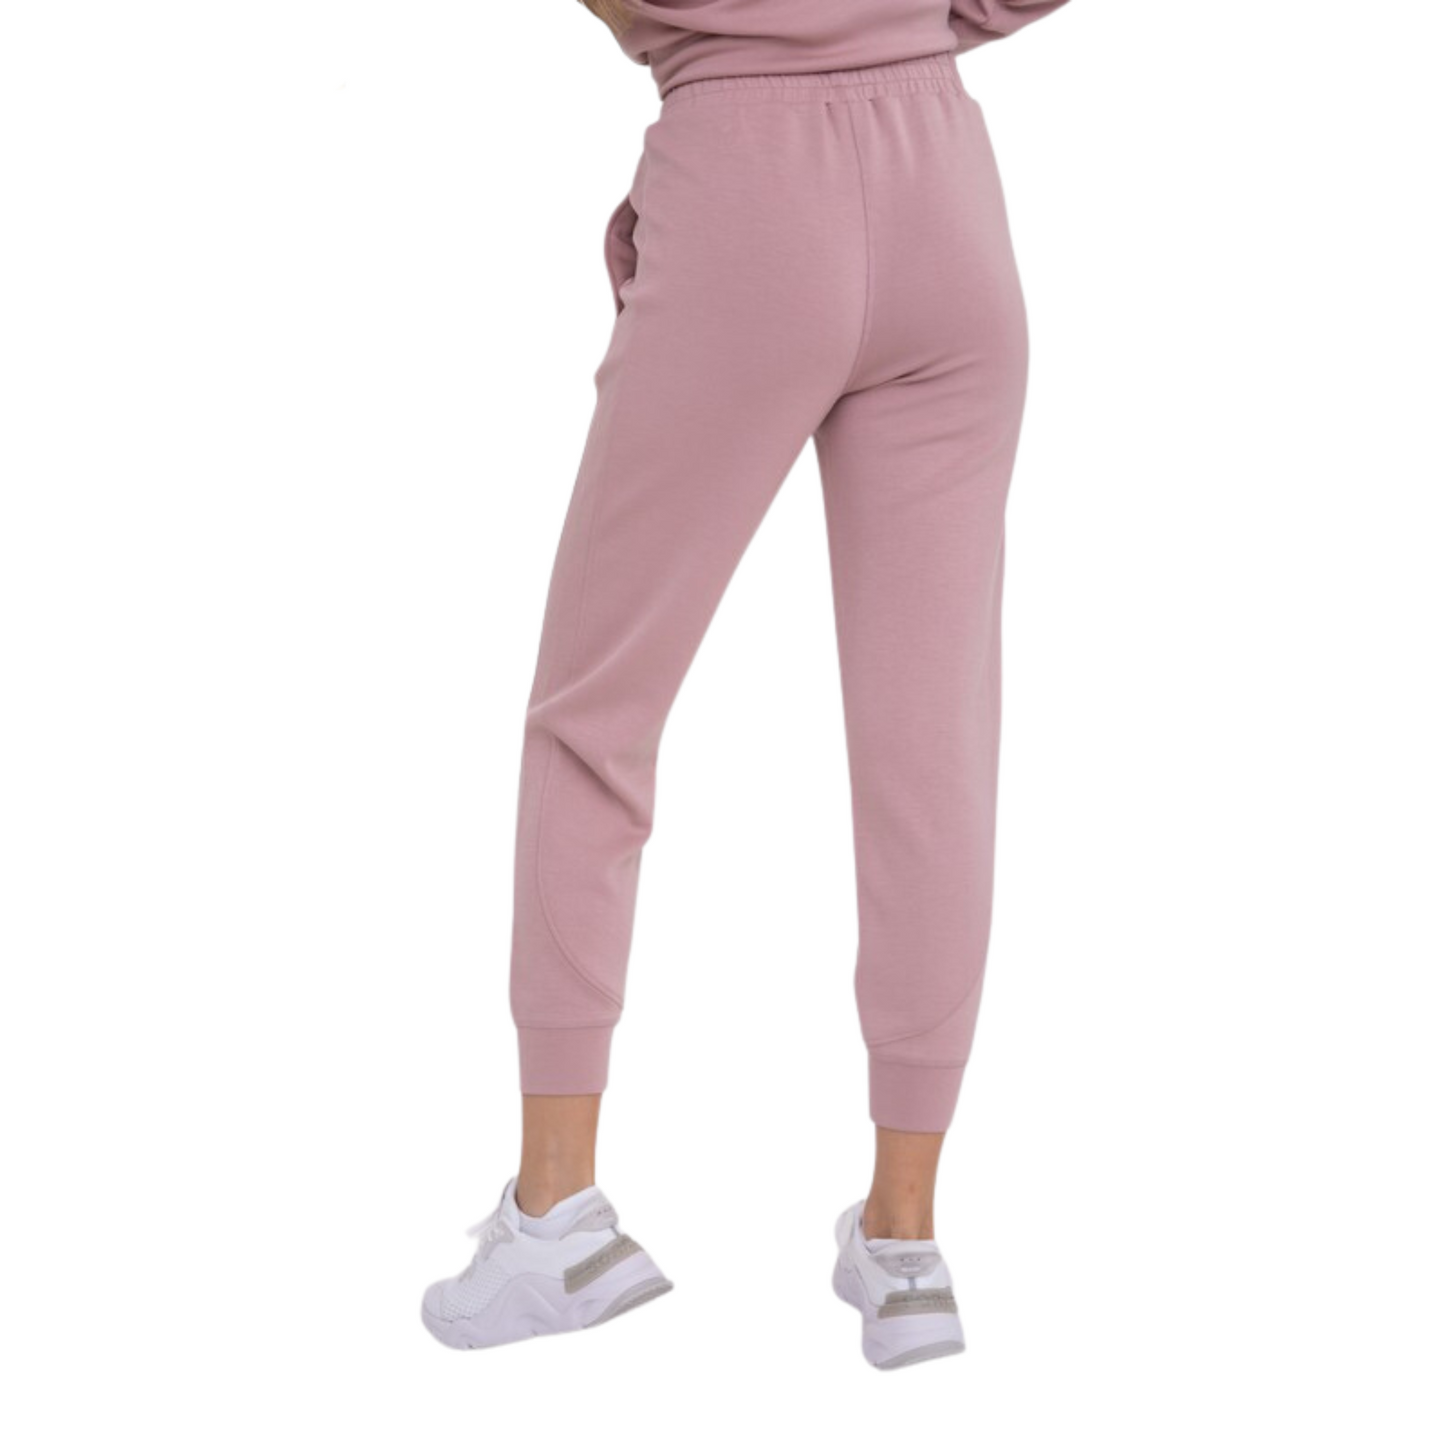 Our Curvy Joggers are designed with comfort and style in mind. Made from butter soft fabric in a neutral mauve color, they feature an elastic waistband, regular size, cuffed hem, and are crafted to flatter all body types. Feel confident and comfortable wearing these stylish joggers.